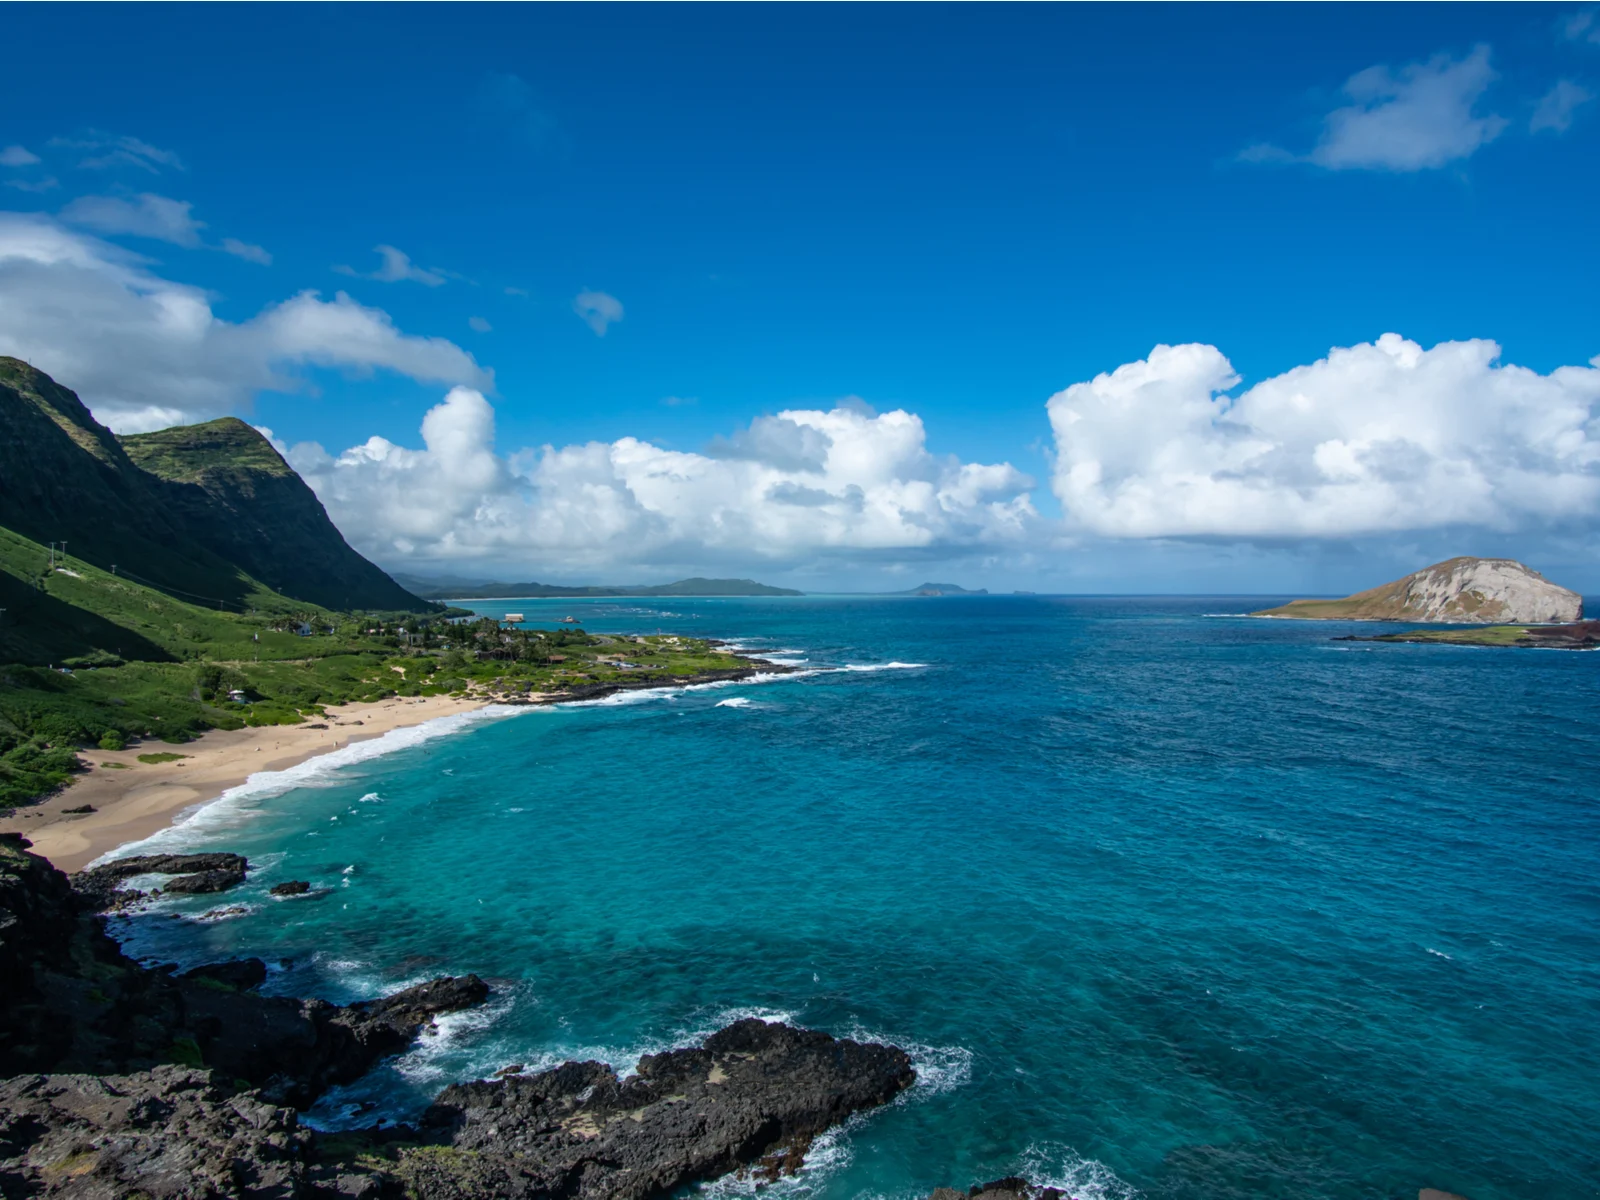 Makapuʻu Point Lighthouse Trail, a top pick for the best hikes in Hawaii